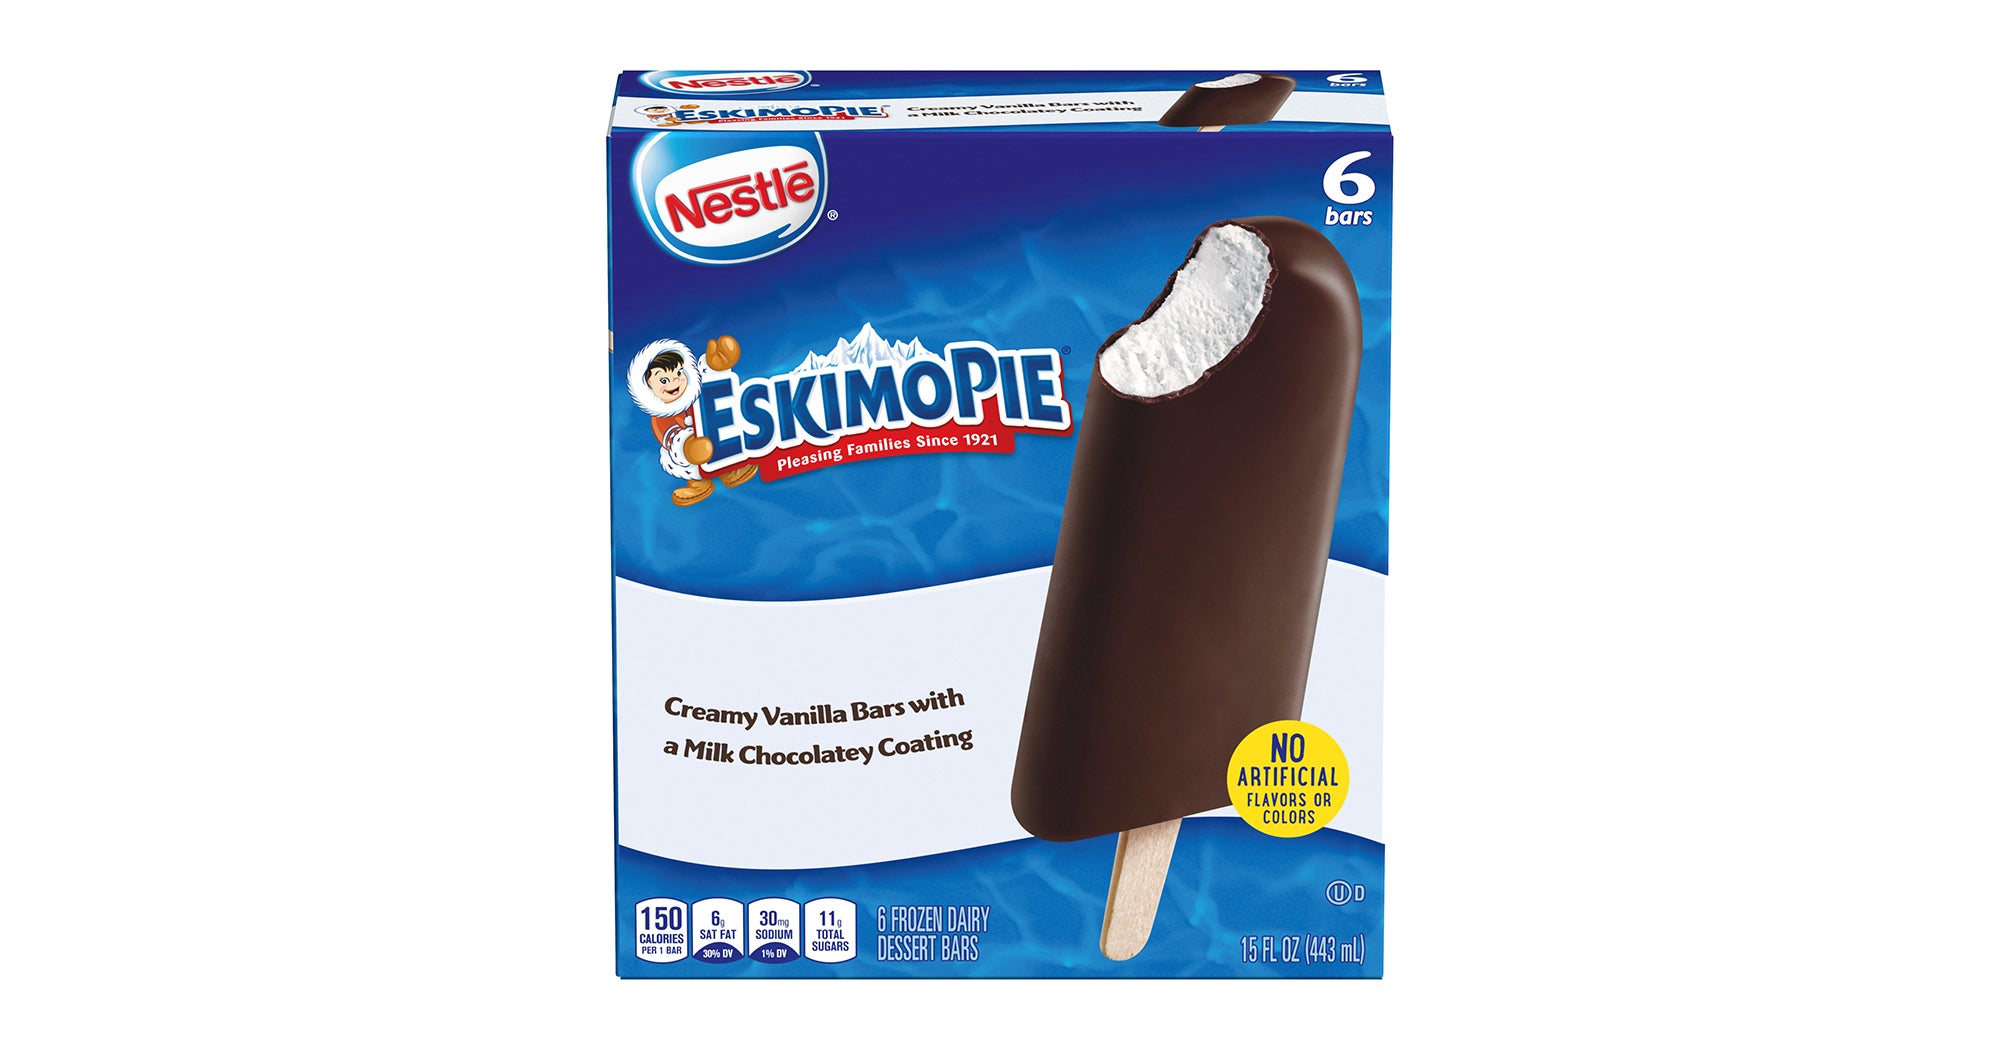 Eskimo Pie Ice Cream Is Changing Its Name Amid Backlash.